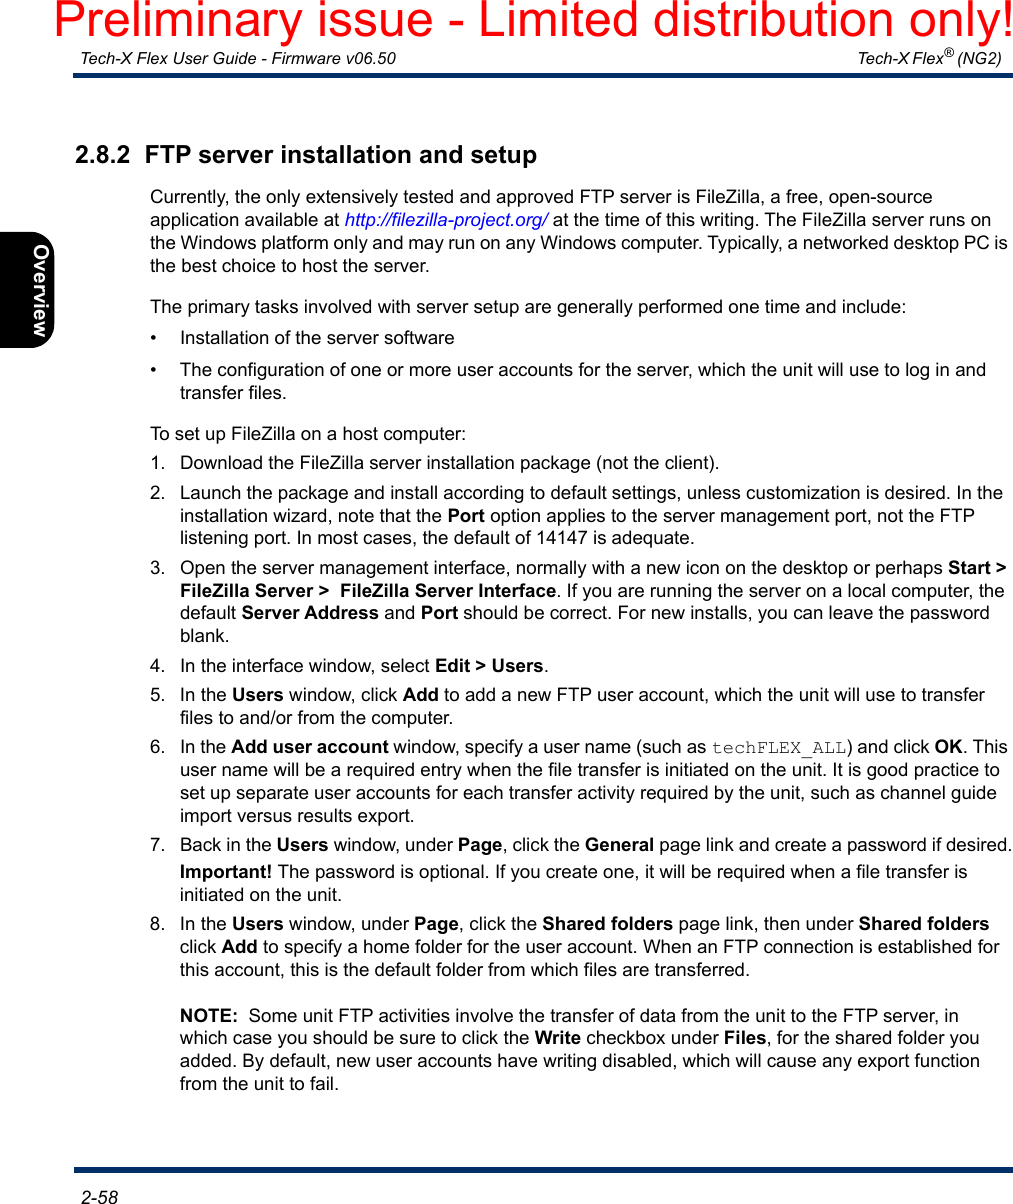  Tech-X Flex User Guide - Firmware v06.50   Tech-X Flex® (NG2)  2-58Intro Overview Wi-Fi Ethernet System IP/Video MoCA RF Specs2.8.2  FTP server installation and setupCurrently, the only extensively tested and approved FTP server is FileZilla, a free, open-source application available at http://filezilla-project.org/ at the time of this writing. The FileZilla server runs on the Windows platform only and may run on any Windows computer. Typically, a networked desktop PC is the best choice to host the server.The primary tasks involved with server setup are generally performed one time and include:• Installation of the server software• The configuration of one or more user accounts for the server, which the unit will use to log in and transfer files.To set up FileZilla on a host computer:1. Download the FileZilla server installation package (not the client).2. Launch the package and install according to default settings, unless customization is desired. In the installation wizard, note that the Port option applies to the server management port, not the FTP listening port. In most cases, the default of 14147 is adequate.3. Open the server management interface, normally with a new icon on the desktop or perhaps Start &gt; FileZilla Server &gt;  FileZilla Server Interface. If you are running the server on a local computer, the default Server Address and Port should be correct. For new installs, you can leave the password blank.4. In the interface window, select Edit &gt; Users.5. In the Users window, click Add to add a new FTP user account, which the unit will use to transfer files to and/or from the computer.6. In the Add user account window, specify a user name (such as techFLEX_ALL) and click OK. This user name will be a required entry when the file transfer is initiated on the unit. It is good practice to set up separate user accounts for each transfer activity required by the unit, such as channel guide import versus results export.7. Back in the Users window, under Page, click the General page link and create a password if desired.Important! The password is optional. If you create one, it will be required when a file transfer is initiated on the unit.8. In the Users window, under Page, click the Shared folders page link, then under Shared folders click Add to specify a home folder for the user account. When an FTP connection is established for this account, this is the default folder from which files are transferred.NOTE:  Some unit FTP activities involve the transfer of data from the unit to the FTP server, in which case you should be sure to click the Write checkbox under Files, for the shared folder you added. By default, new user accounts have writing disabled, which will cause any export function from the unit to fail.Preliminary issue - Limited distribution only!